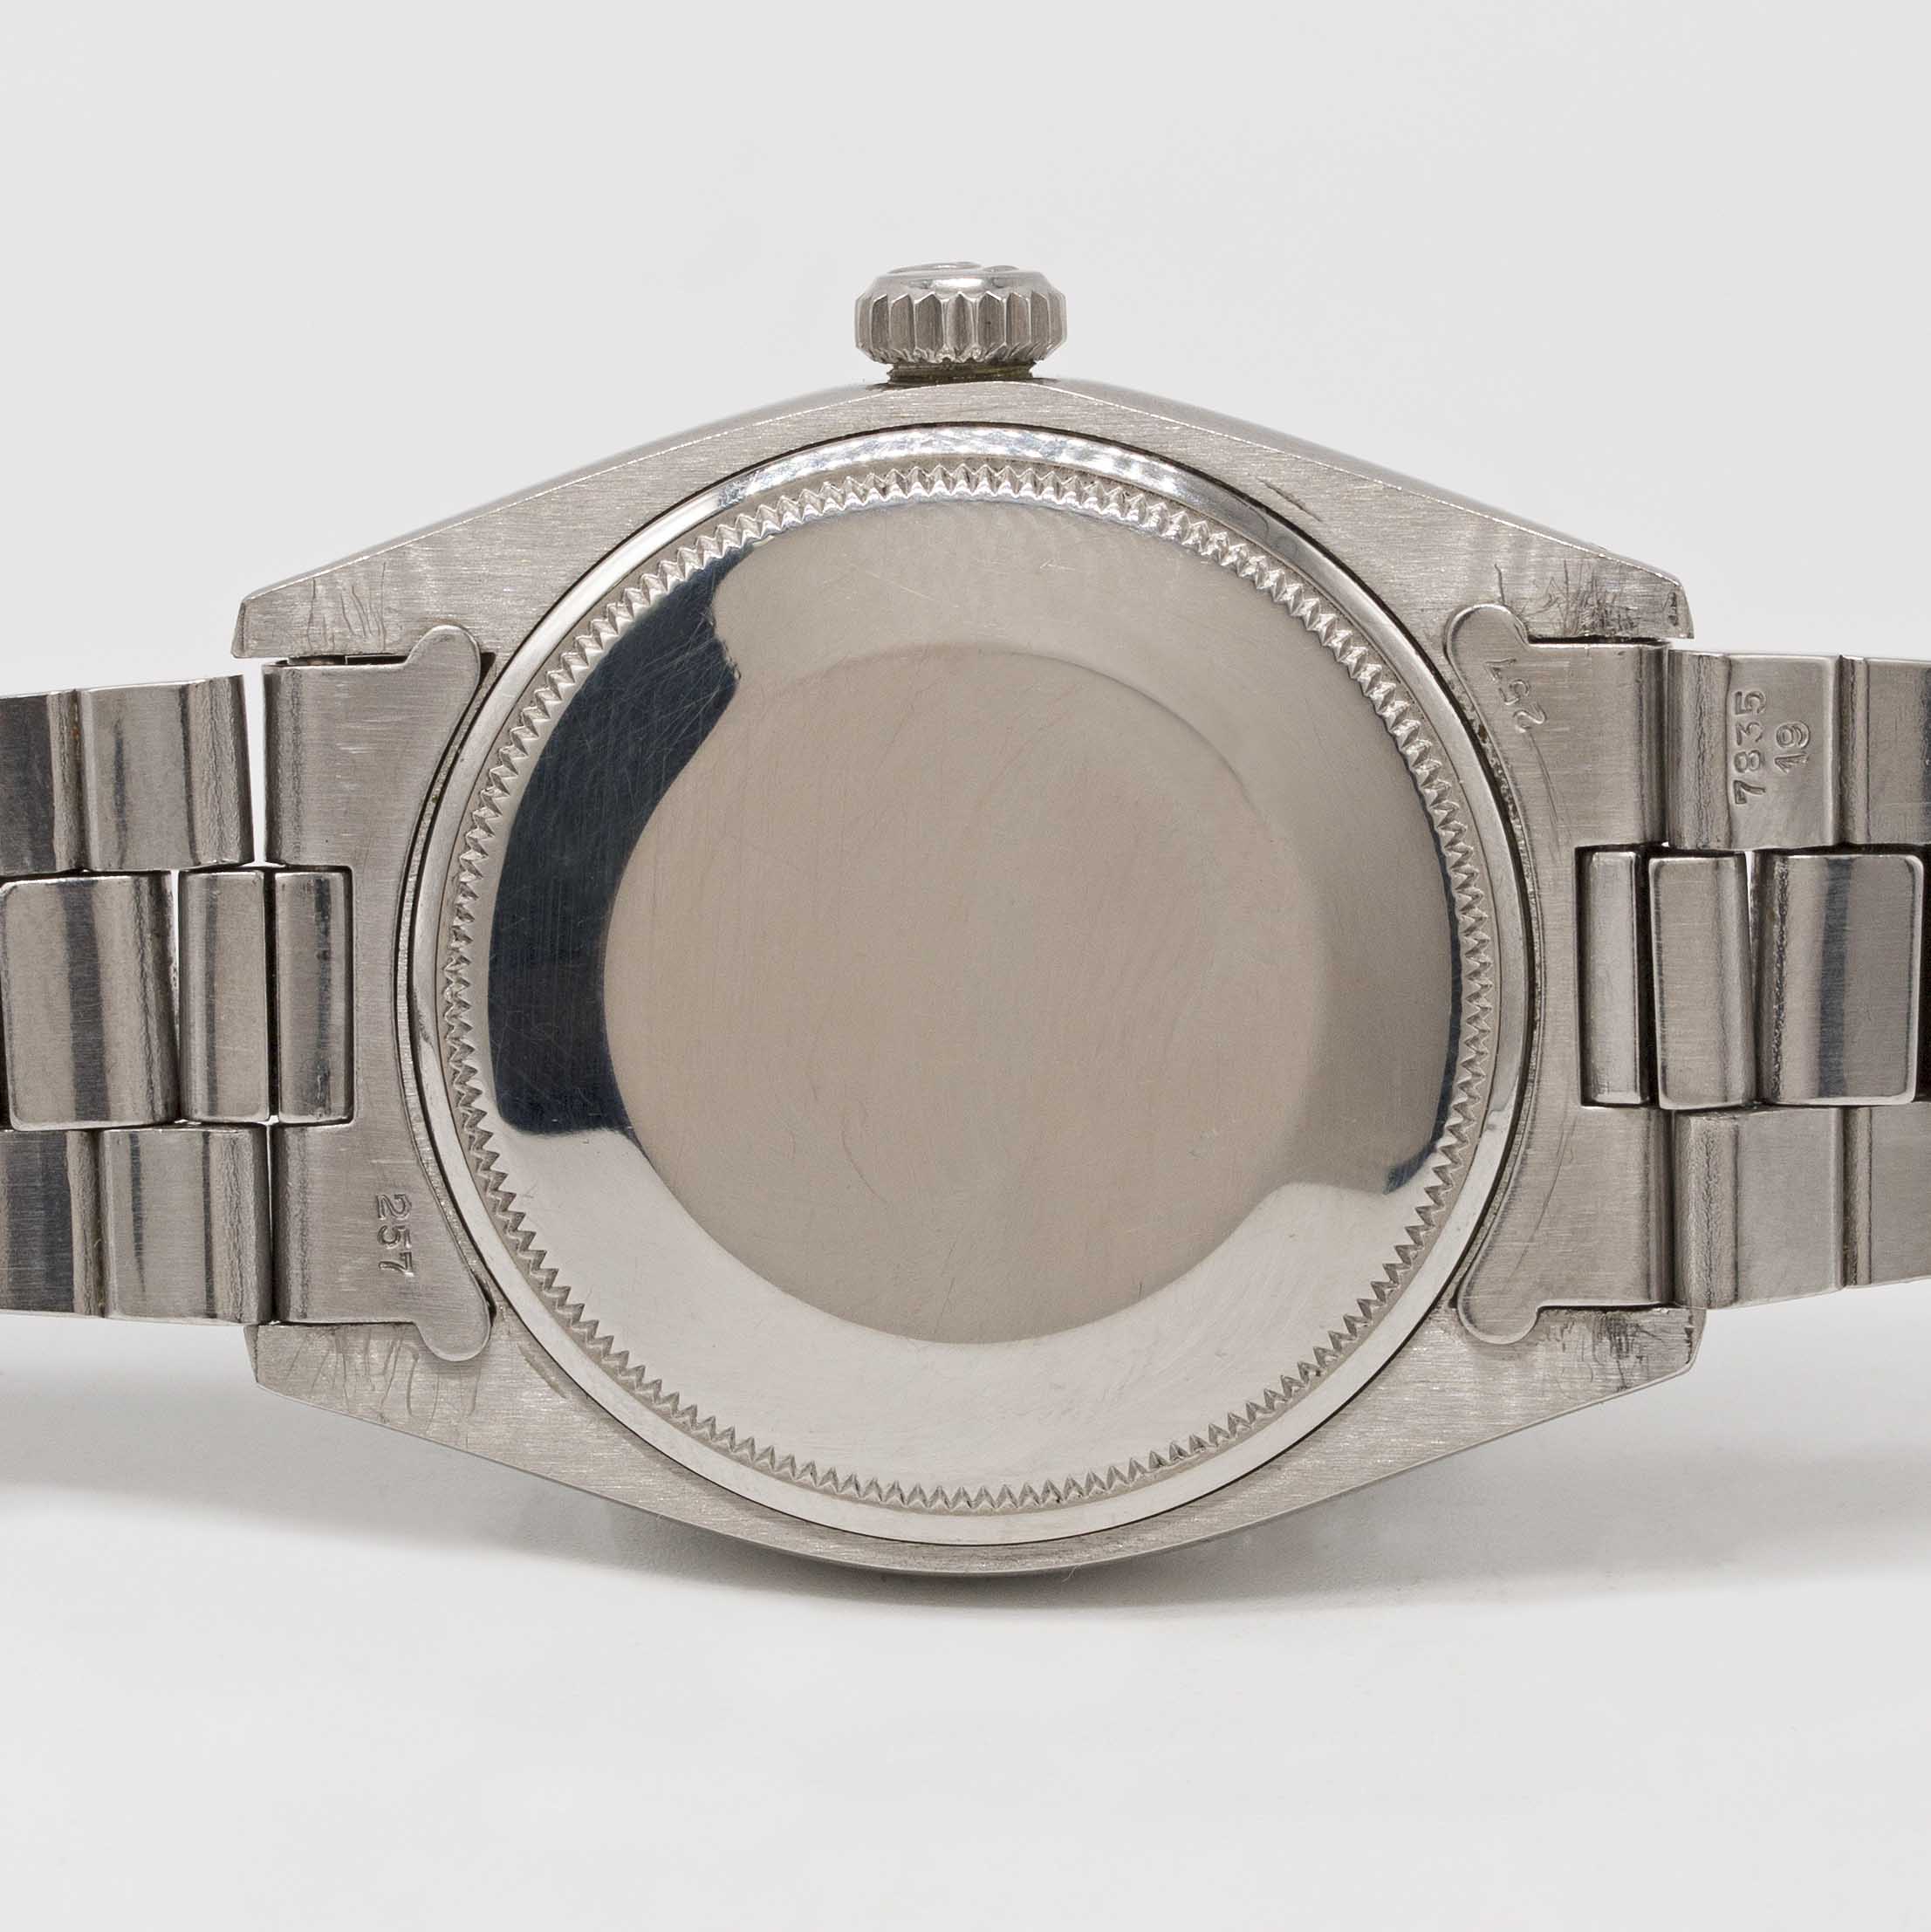 A GENTLEMAN'S STAINLESS STEEL ROLEX OYSTER PERPETUAL DATE BRACELET WATCH CIRCA 1972, REF. 1500 - Image 2 of 3